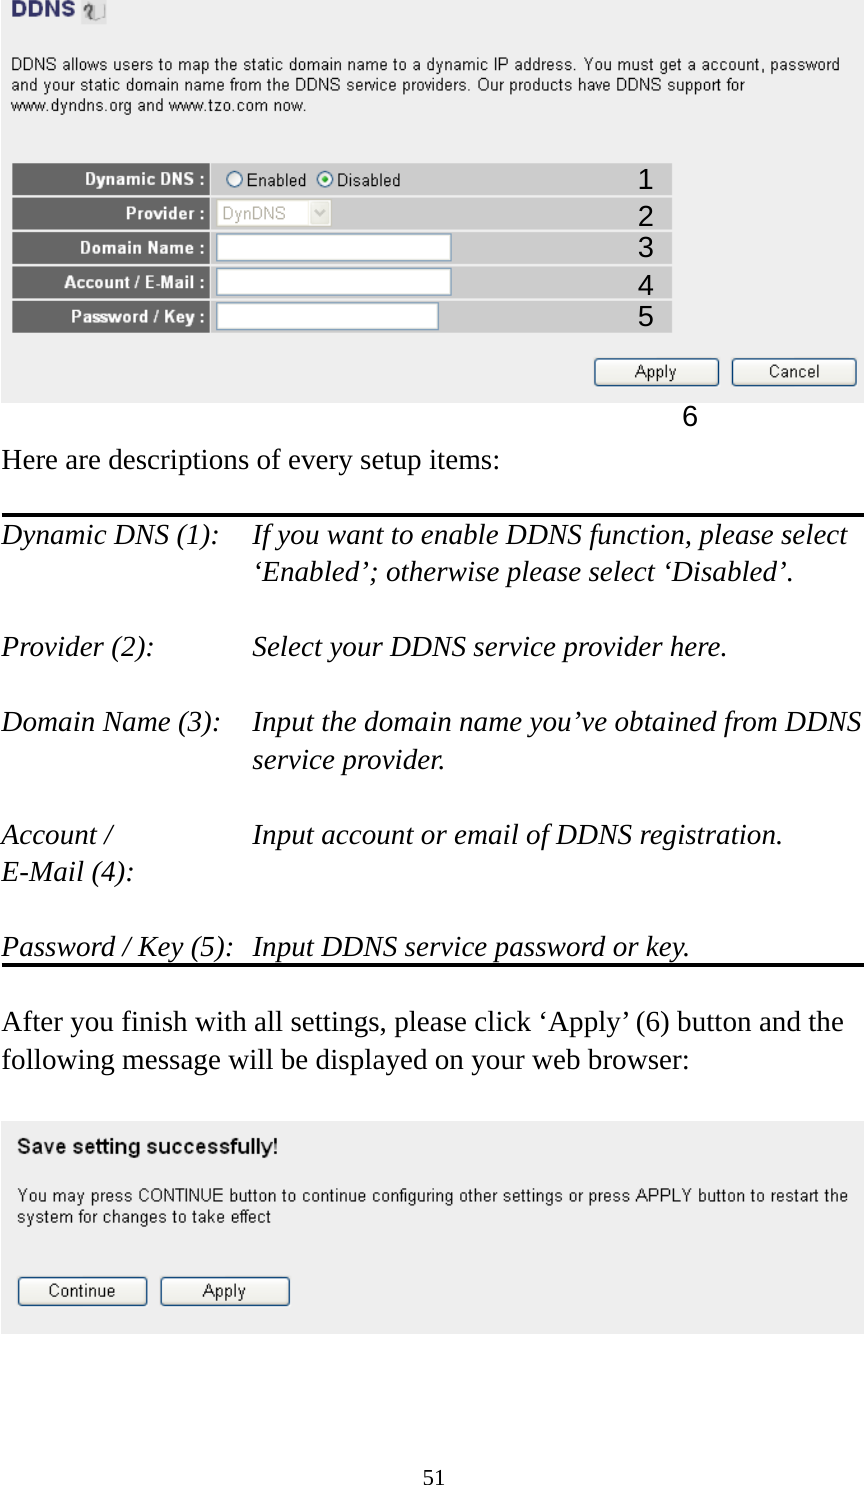 51   Here are descriptions of every setup items:  Dynamic DNS (1):    If you want to enable DDNS function, please select ‘Enabled’; otherwise please select ‘Disabled’.  Provider (2):      Select your DDNS service provider here.  Domain Name (3):    Input the domain name you’ve obtained from DDNS service provider.  Account /        Input account or email of DDNS registration. E-Mail (4):    Password / Key (5):   Input DDNS service password or key.  After you finish with all settings, please click ‘Apply’ (6) button and the following message will be displayed on your web browser:     1 2345 6 